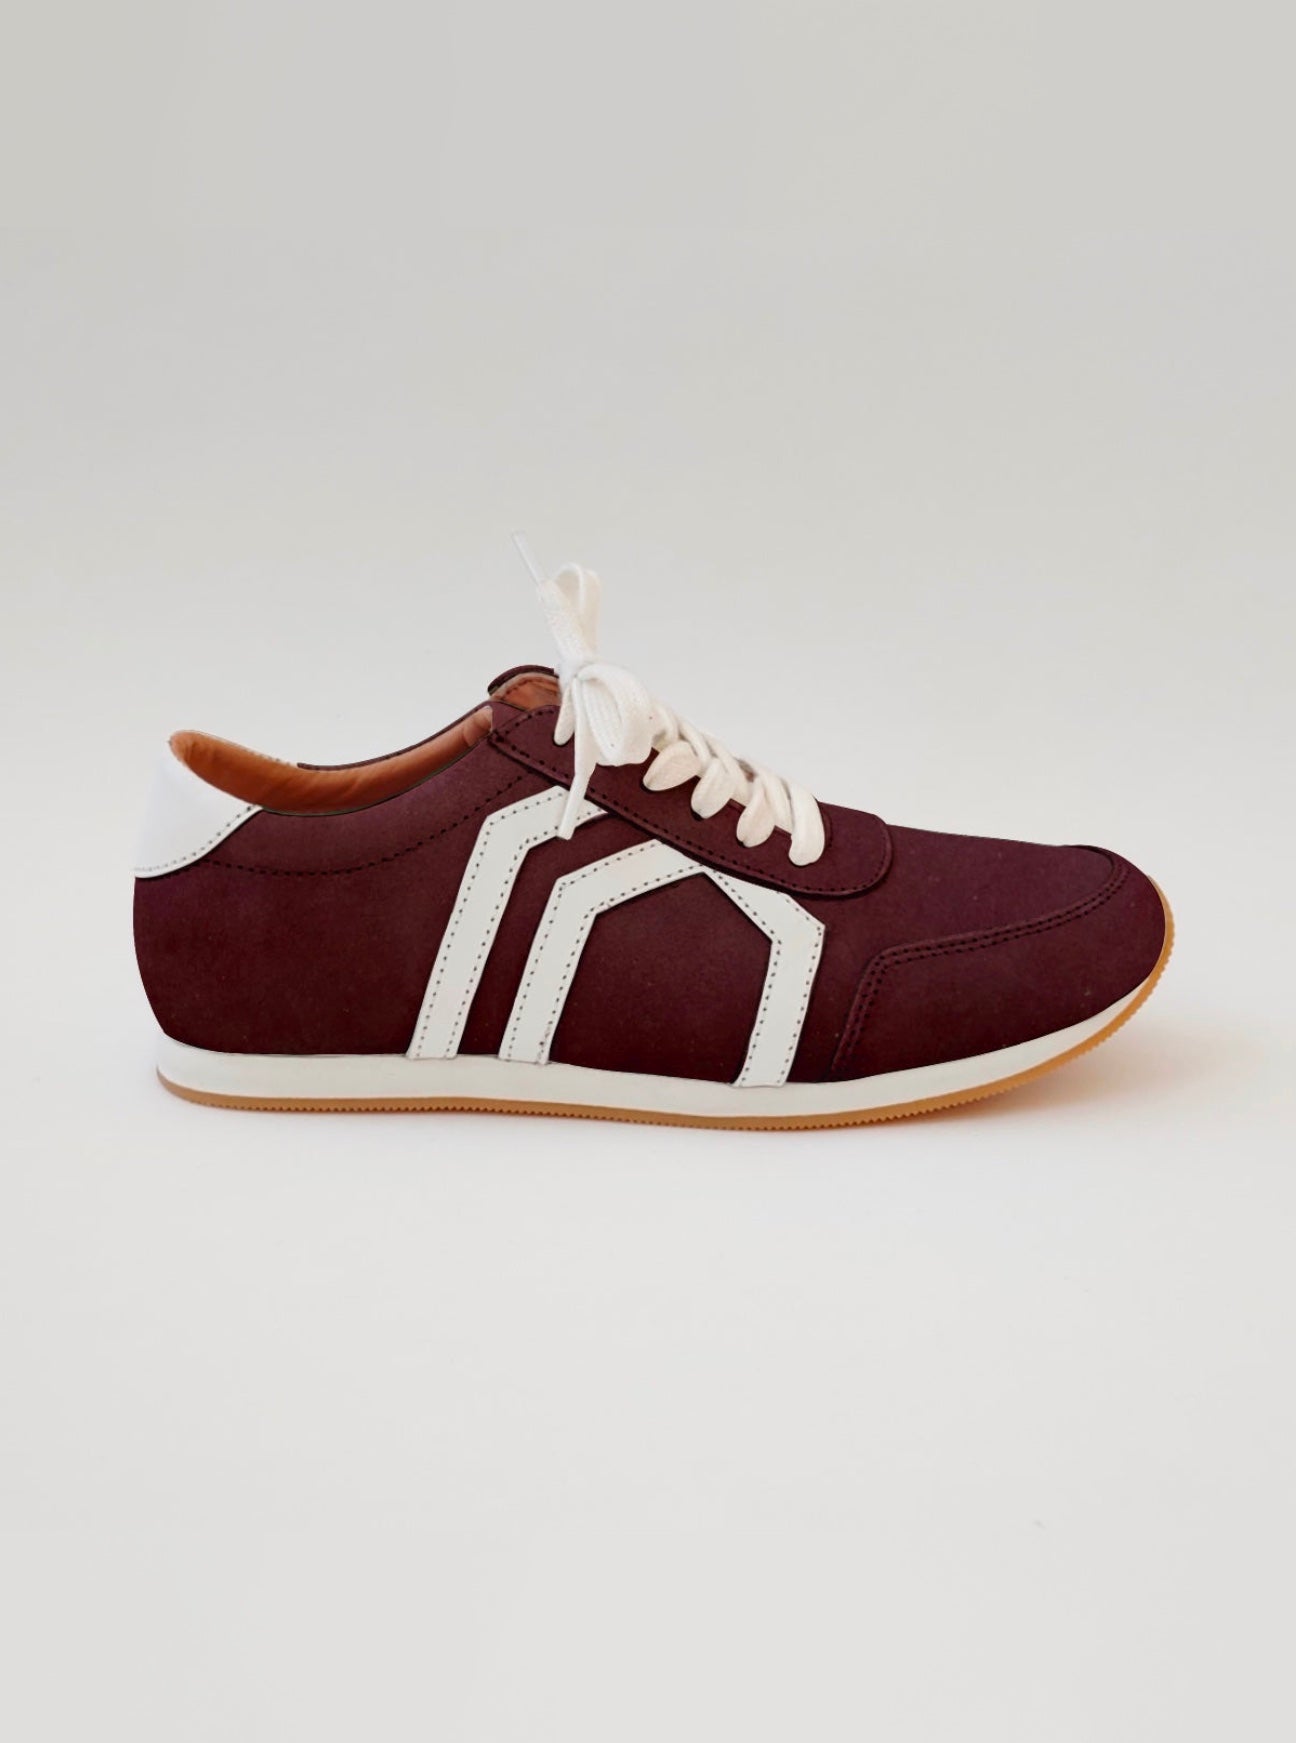 Jessie Sneaker in Wine Nubuck with Snow Leather (PREORDER)